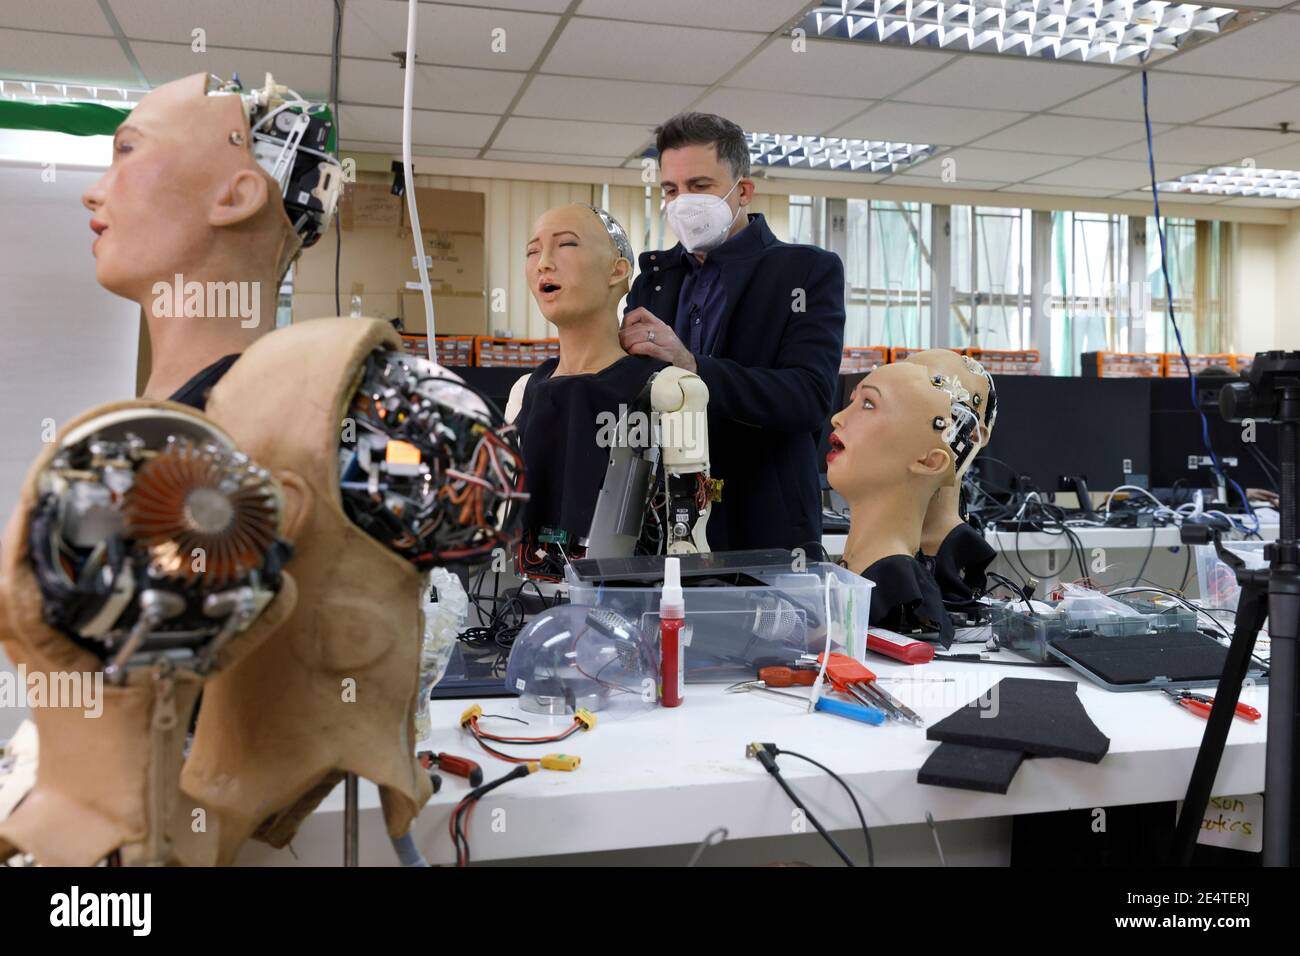 Founder and Chief Executive Officer (CEO) of Hanson Robotics, David Hanson  adjusts a head of a humanoid robot at the company's lab in Hong Kong, China  January 12, 2021. Picture taken January